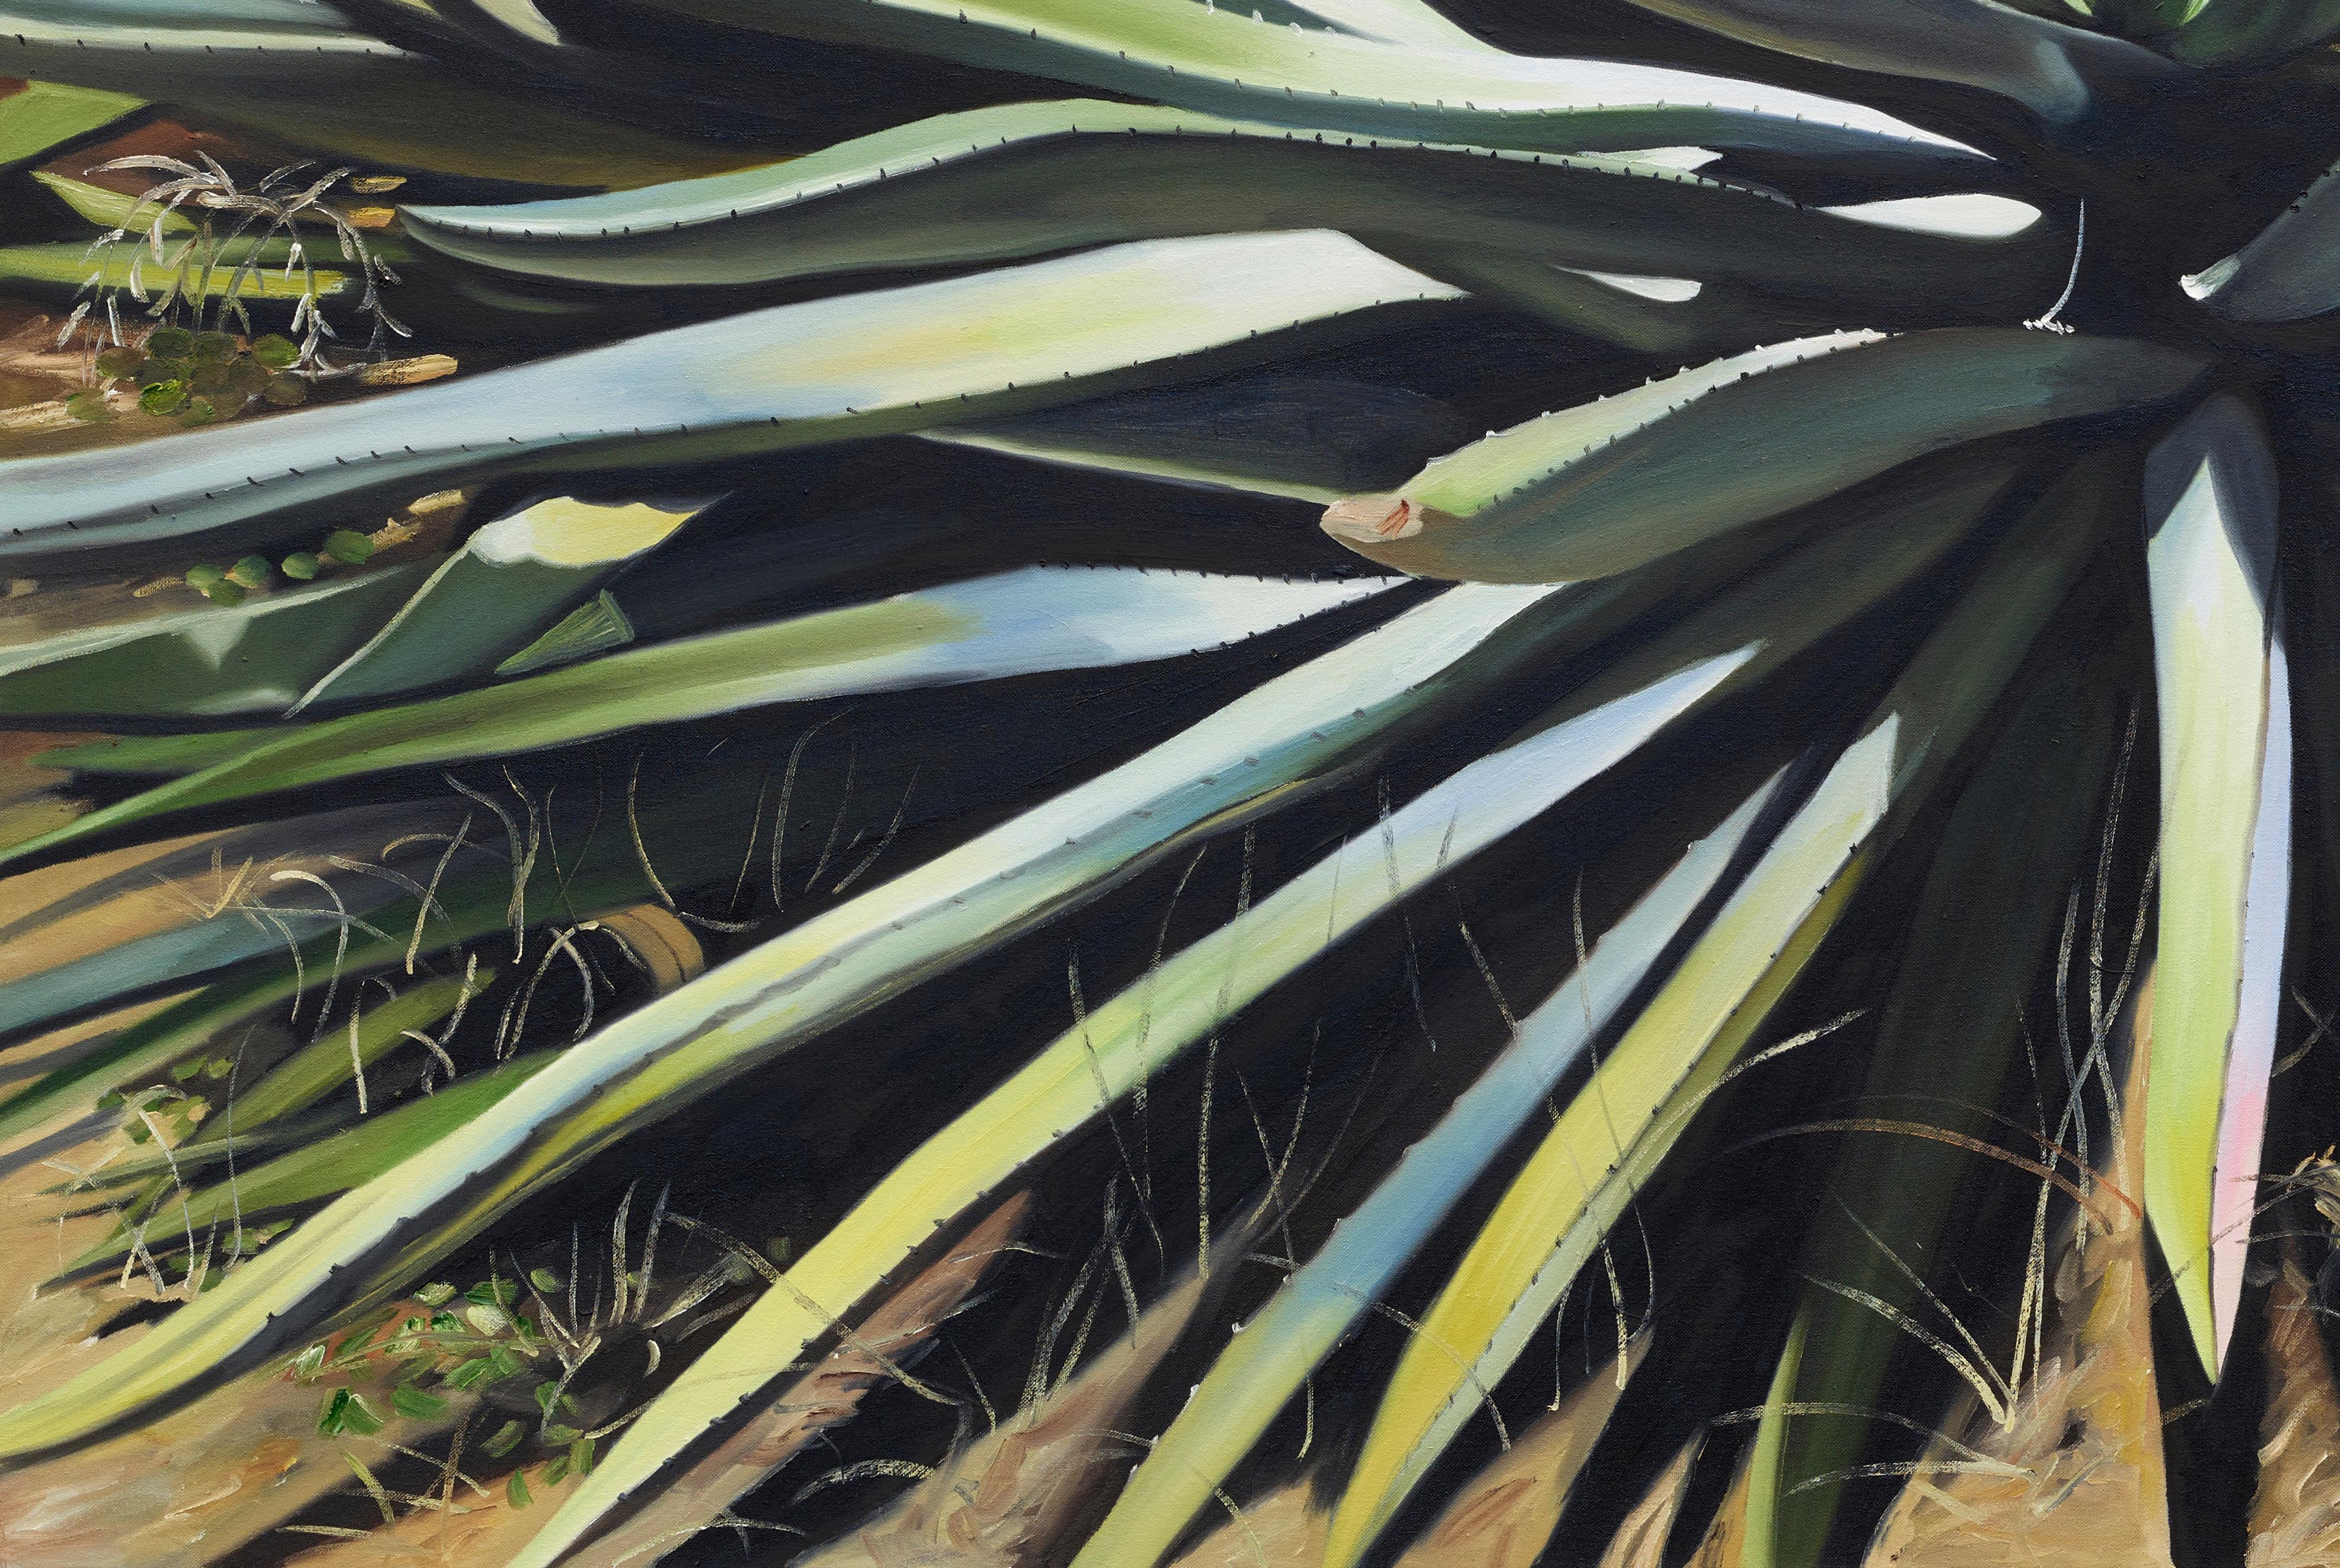 orom id atset (2) / figuration, agave, green, blue, photorealism, landscape - Contemporary Painting by Silke Albrecht